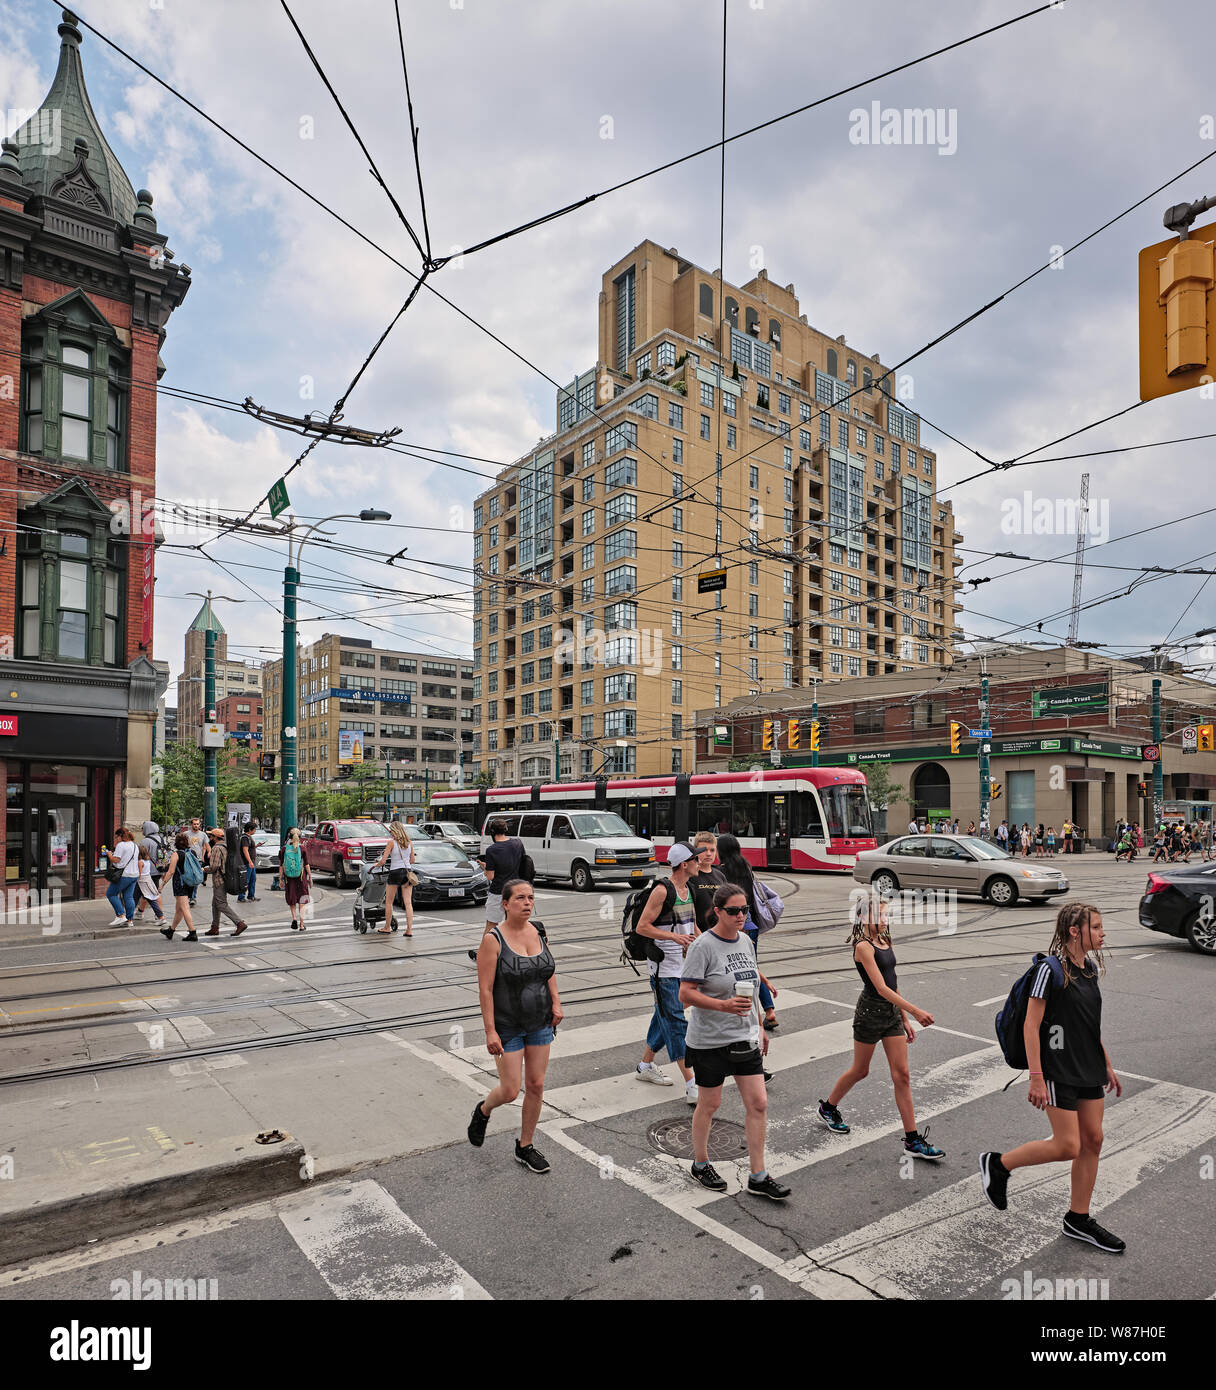 City Tram in Toronto, Queen St West - Spadina Ave Stock Photo